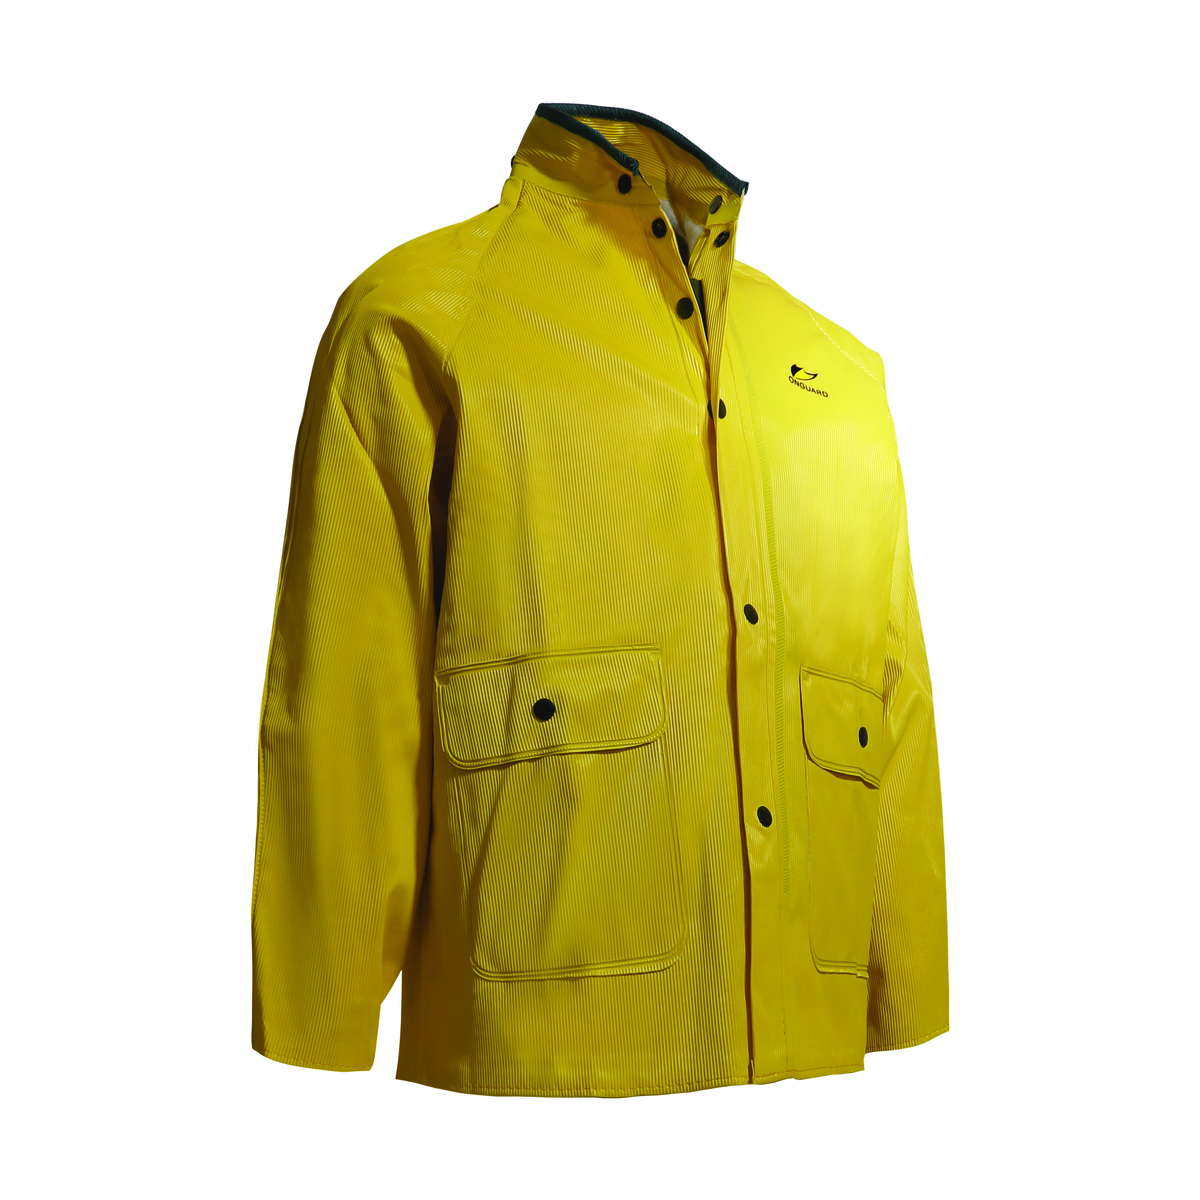 Dunlop® Protective Footwear 2X Yellow Webtex .65 mm Polyester/PVC Rain Jacket With Hood Snaps